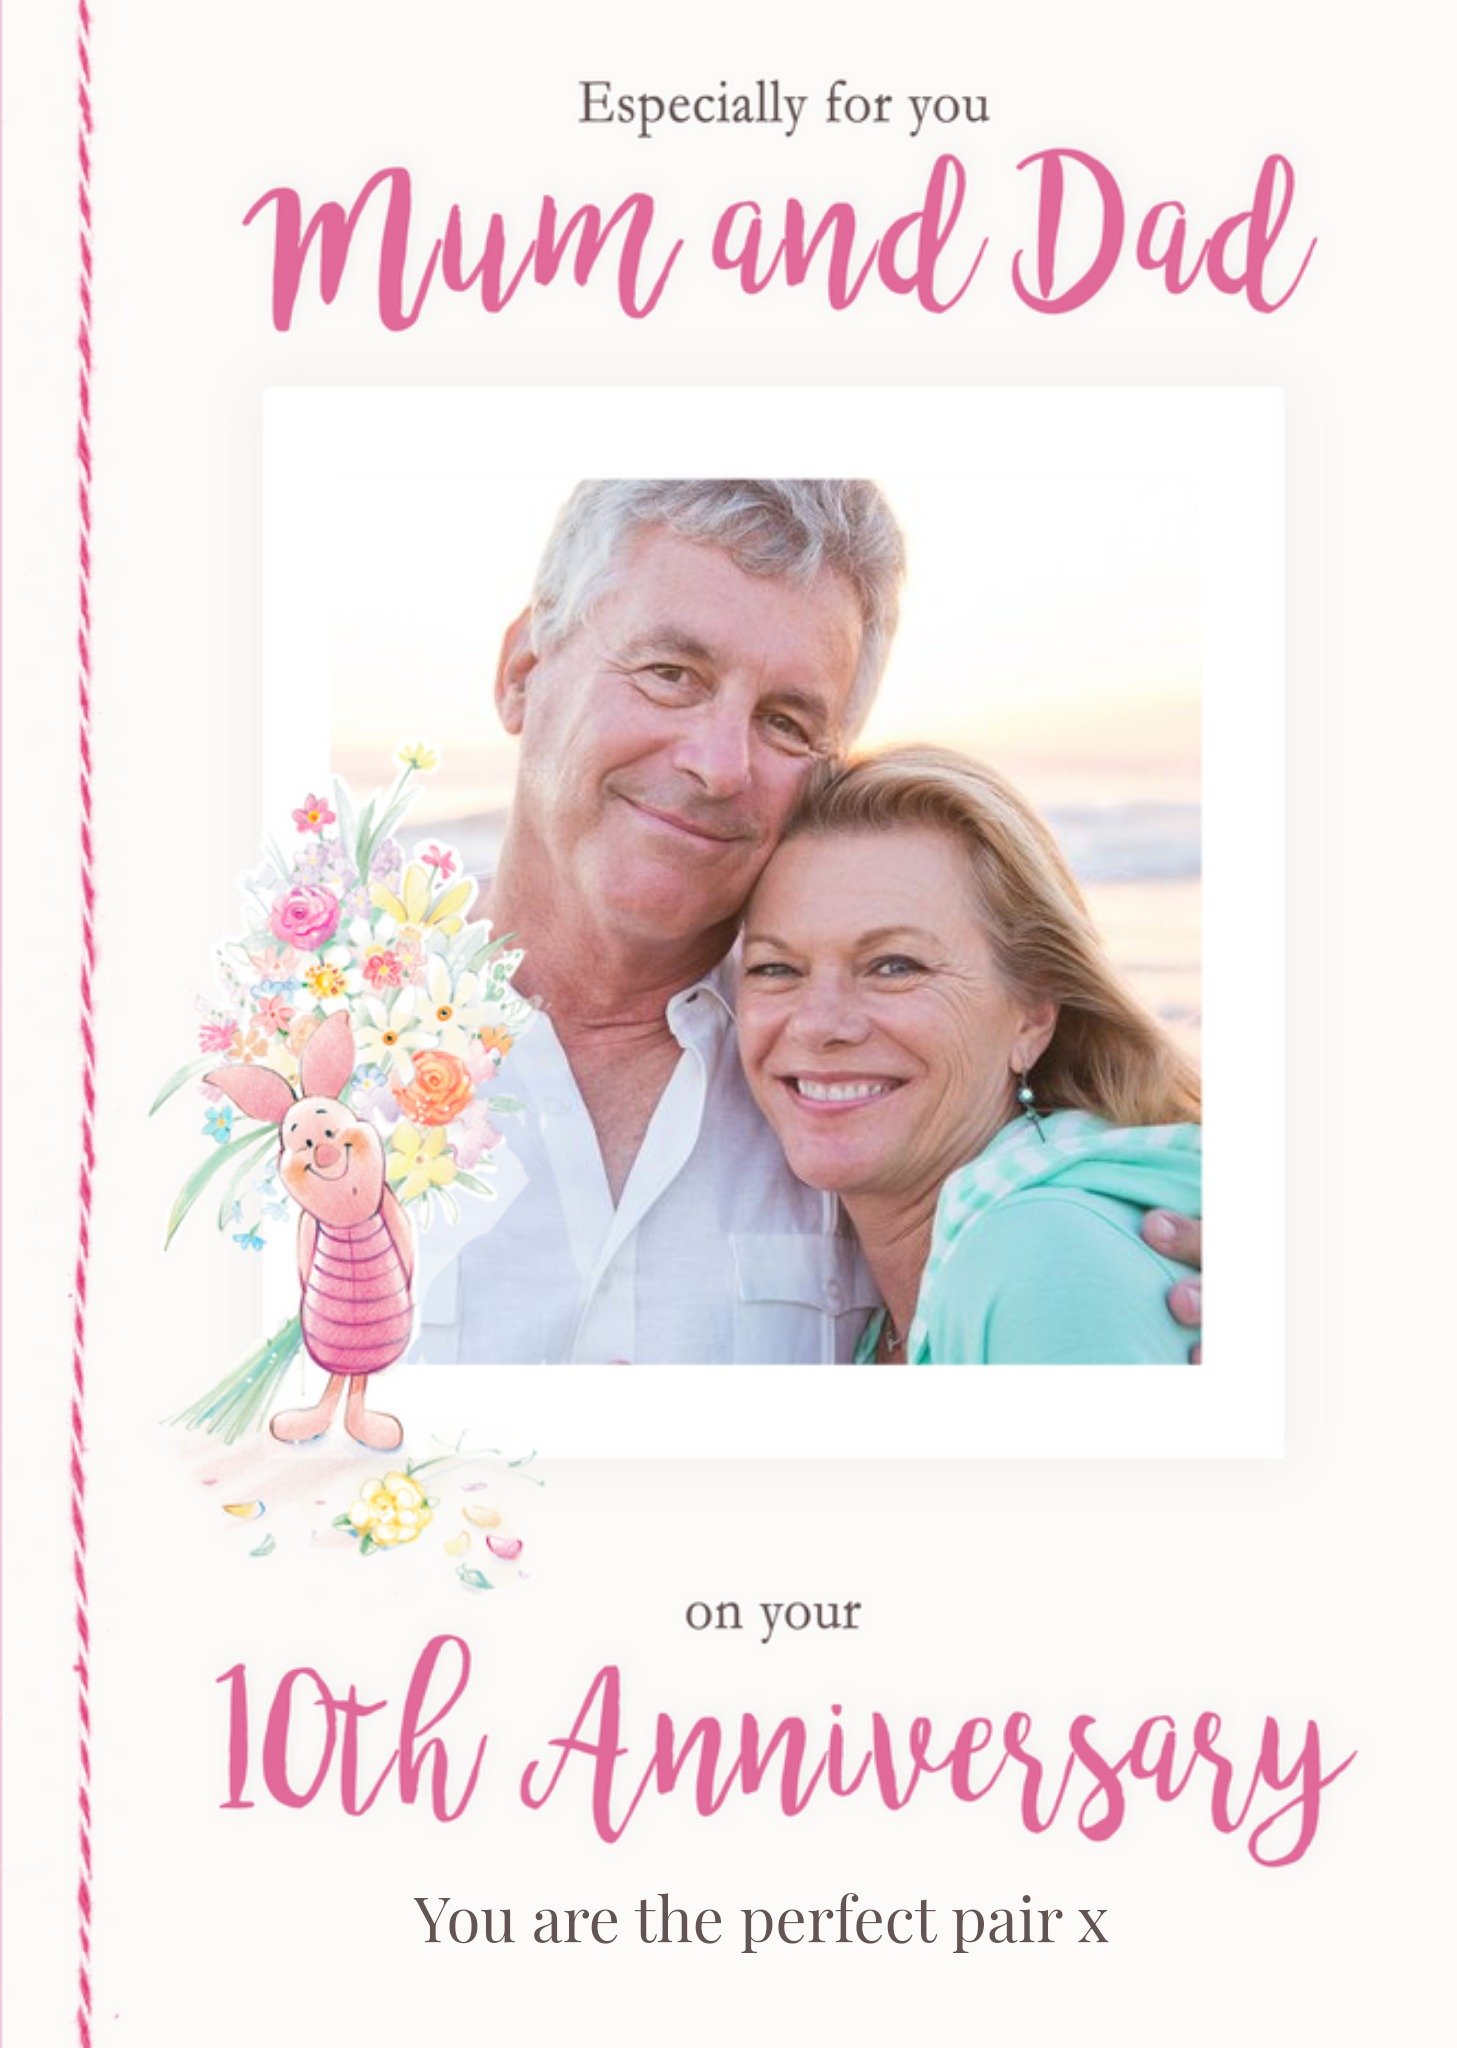 Disney Winnie the Pooh Mum And Dad Perfect Pair 10th Anniversary Photo Upload Card, Large